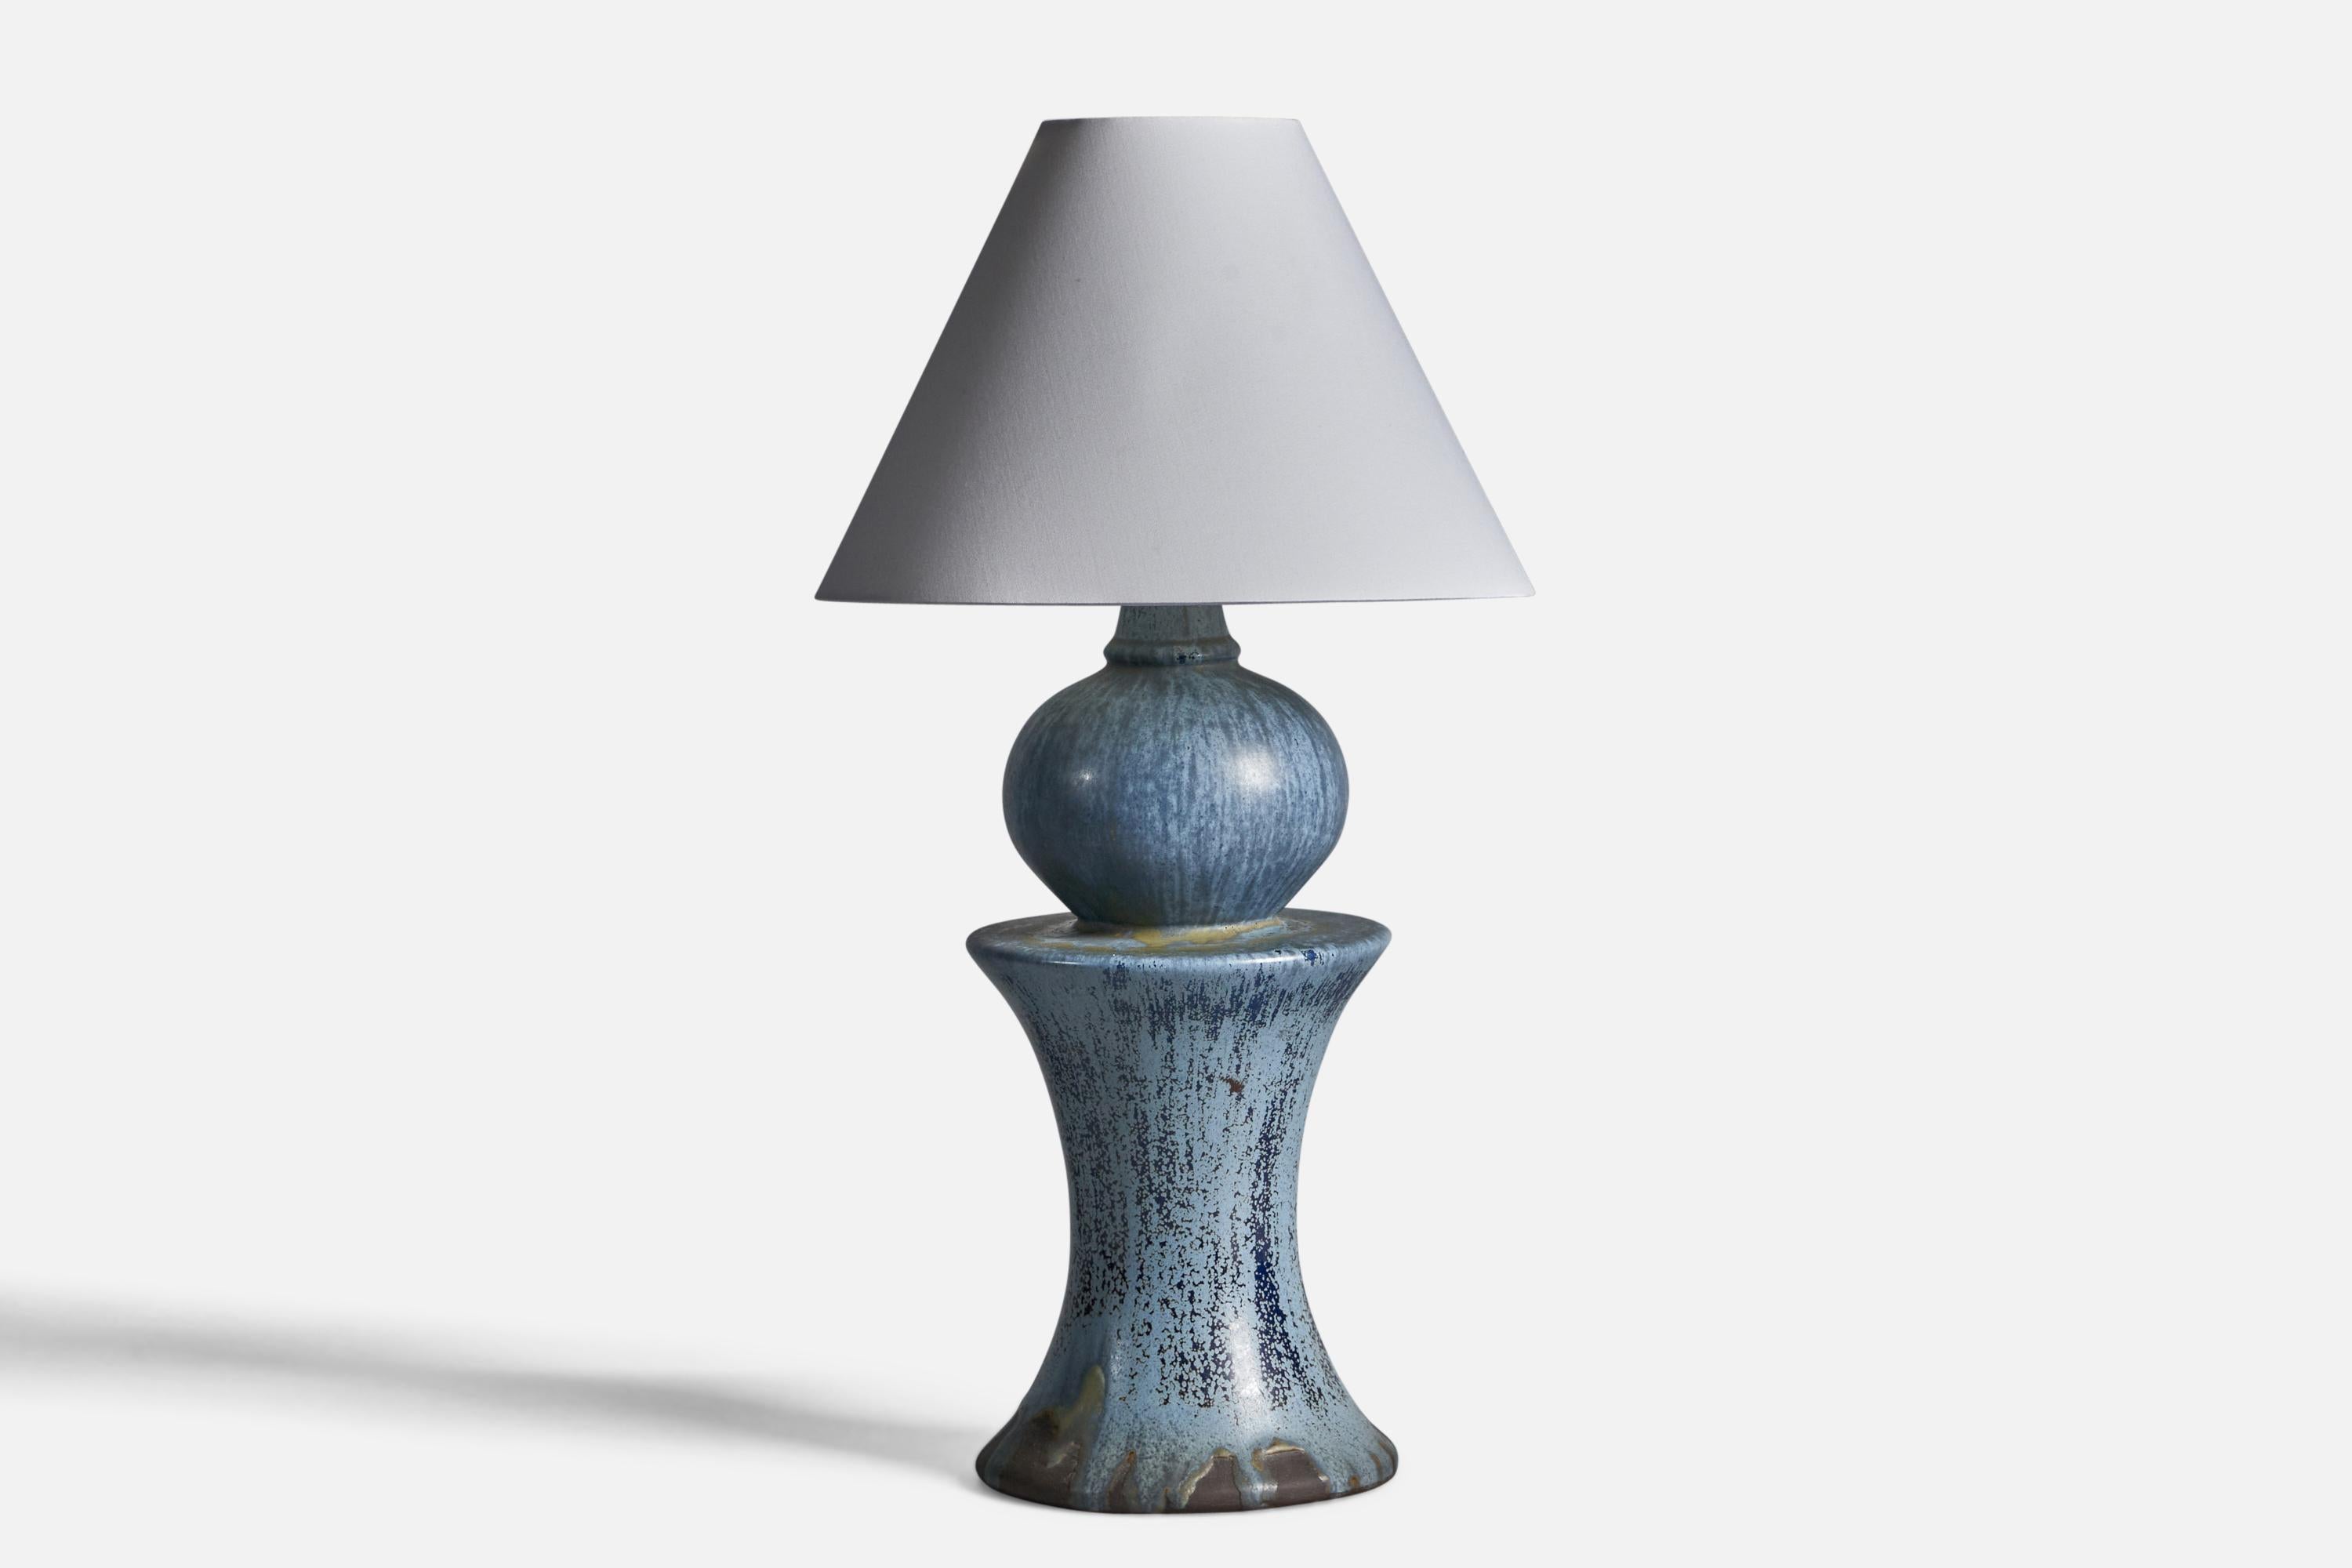 A blue-glazed stoneware table lamp designed and produced in Sweden, 1960s.

Dimensions of Lamp (inches): 15.5